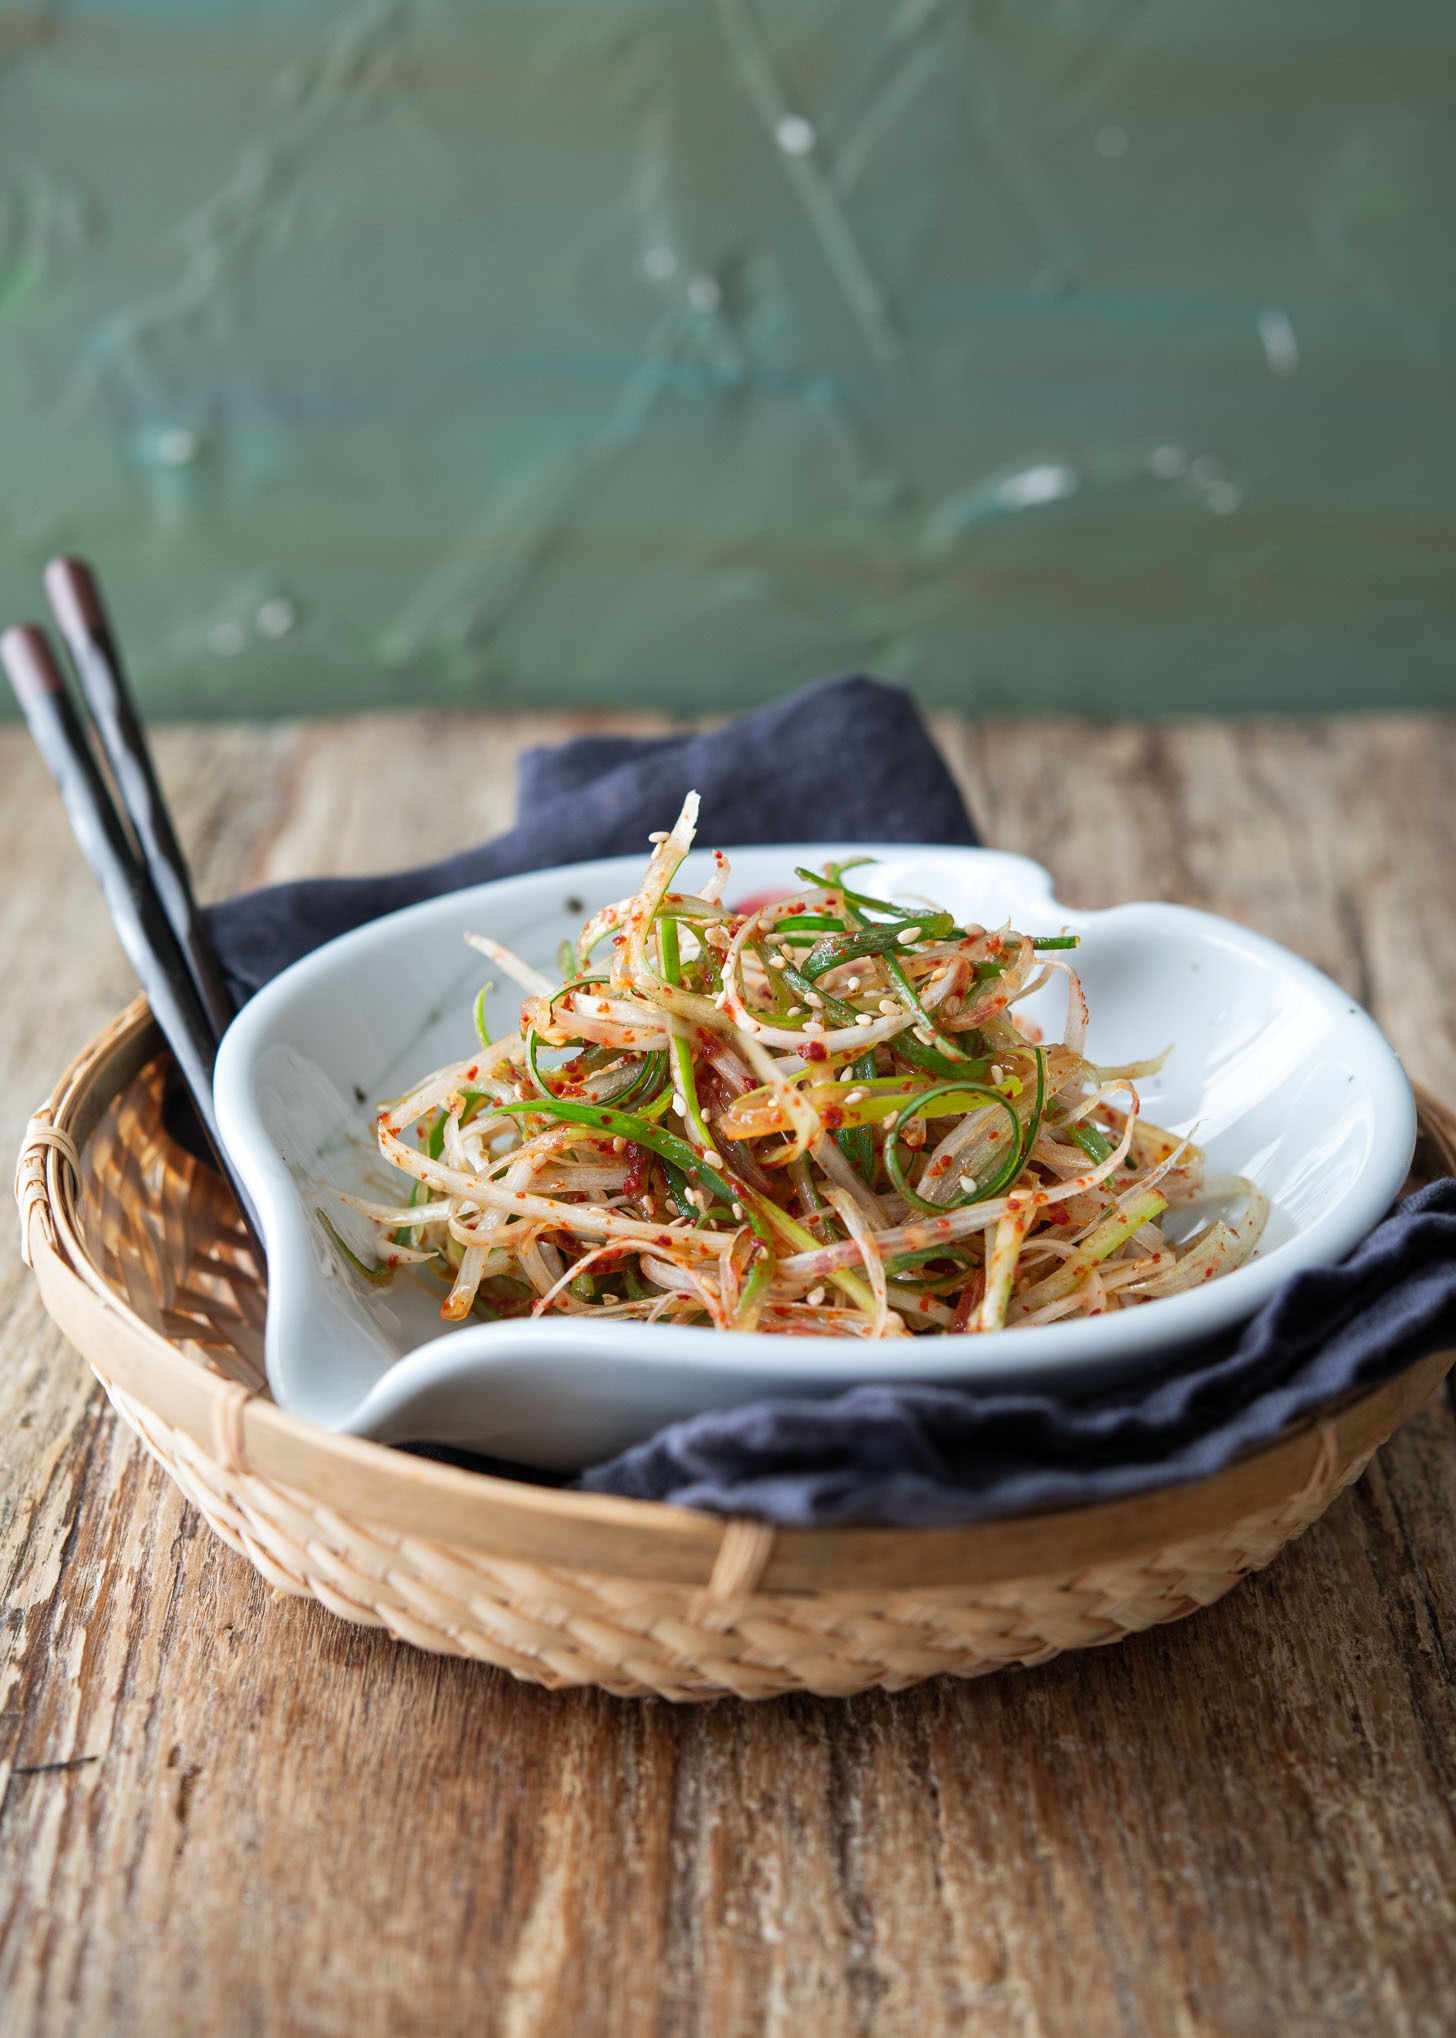 Korean green onion salad is served in a bowl over a wooden tray.